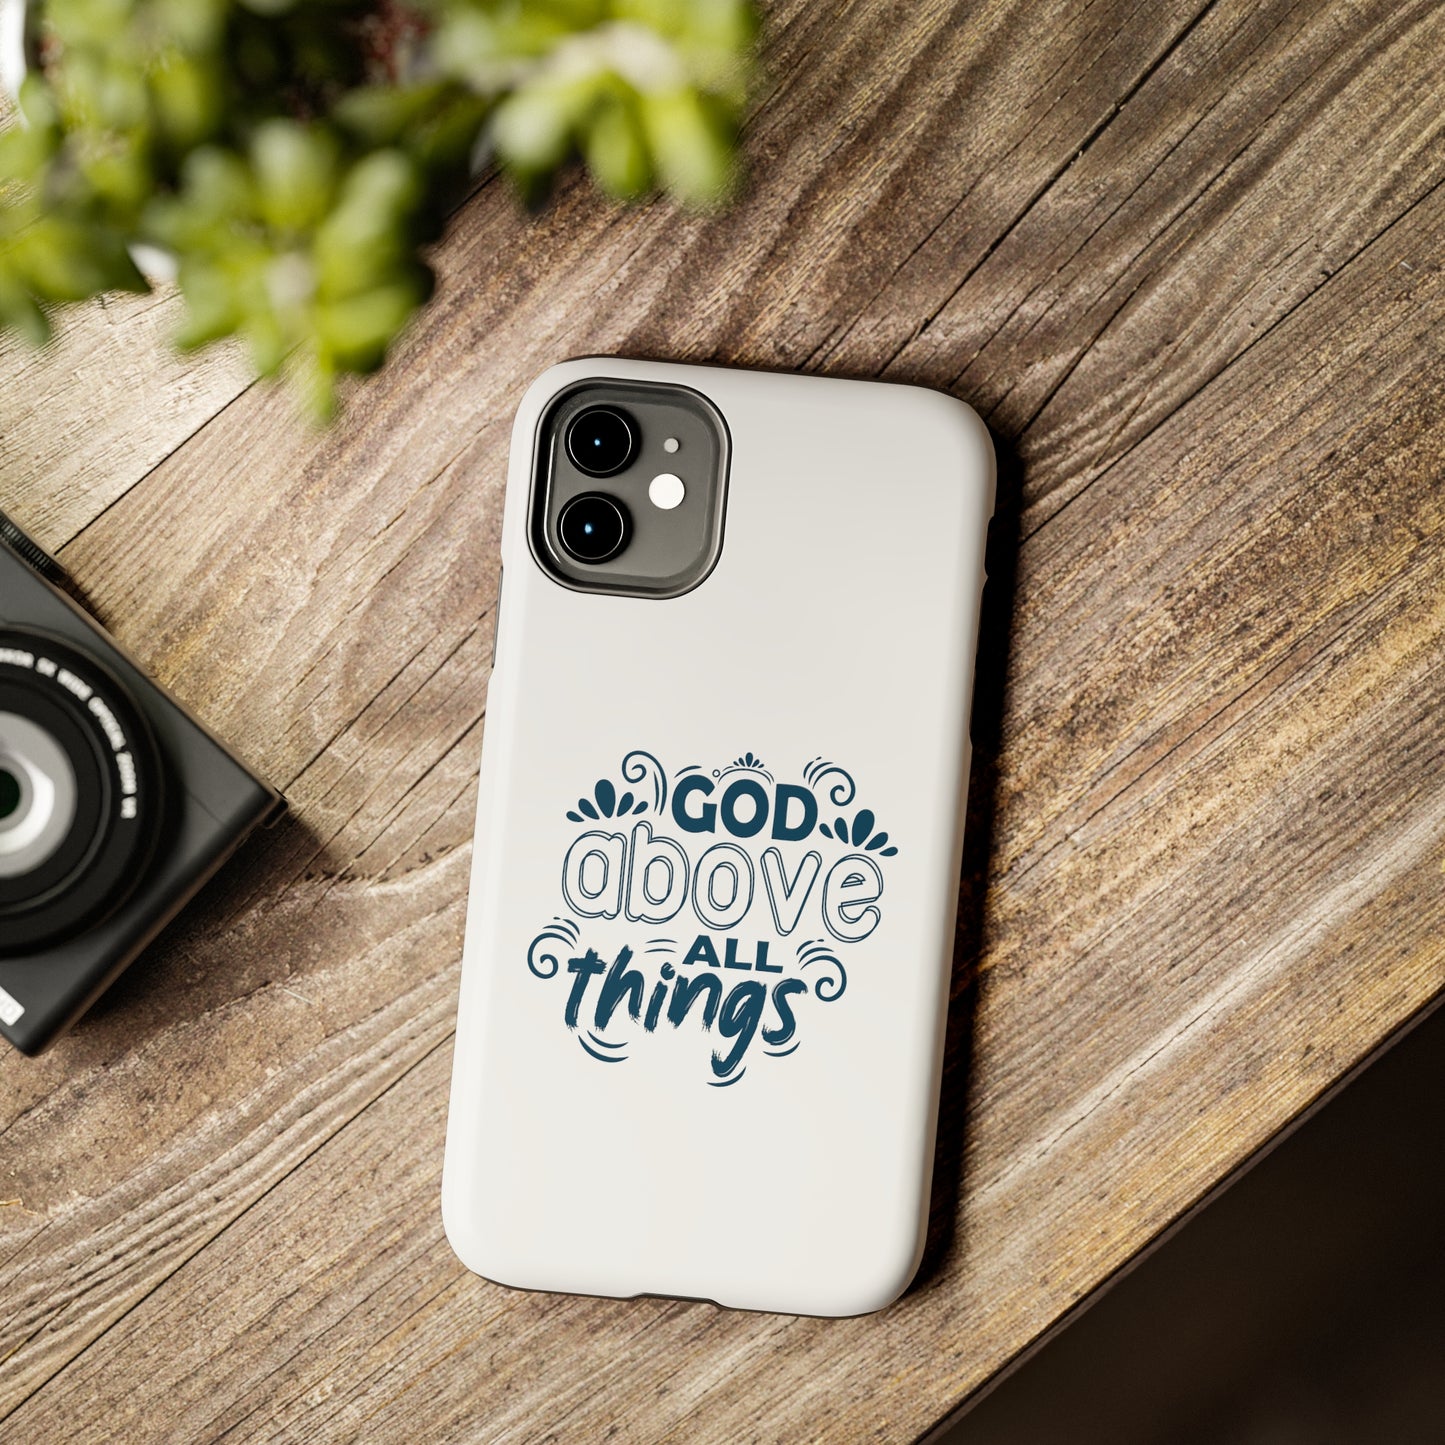 God Above All Things Tough Phone Cases, Case-Mate